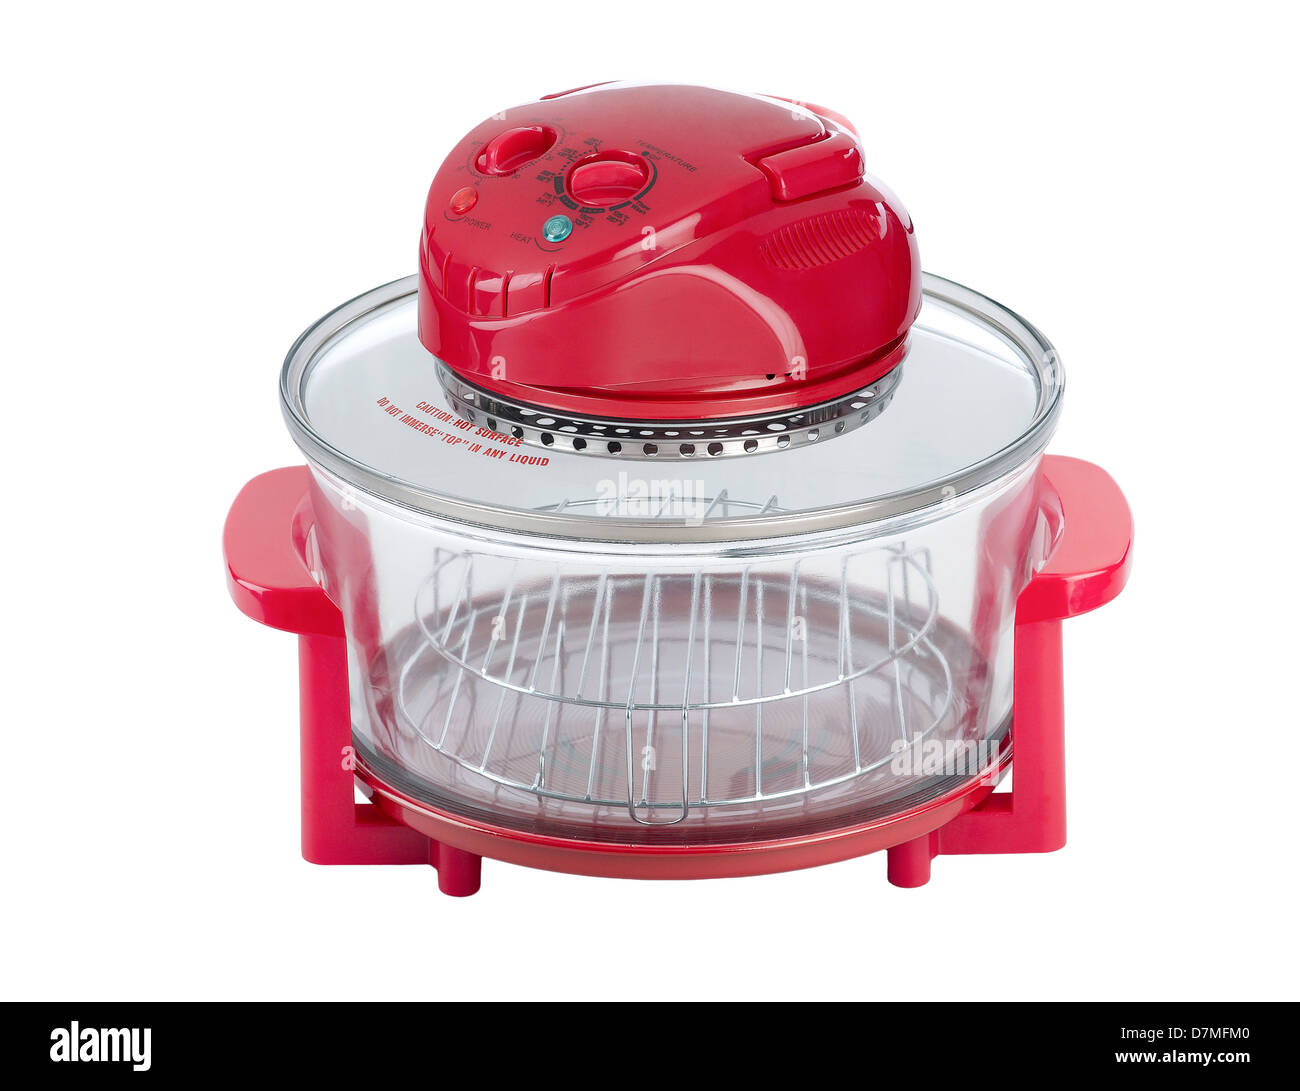 Empty red electric convection oven Stock Photo